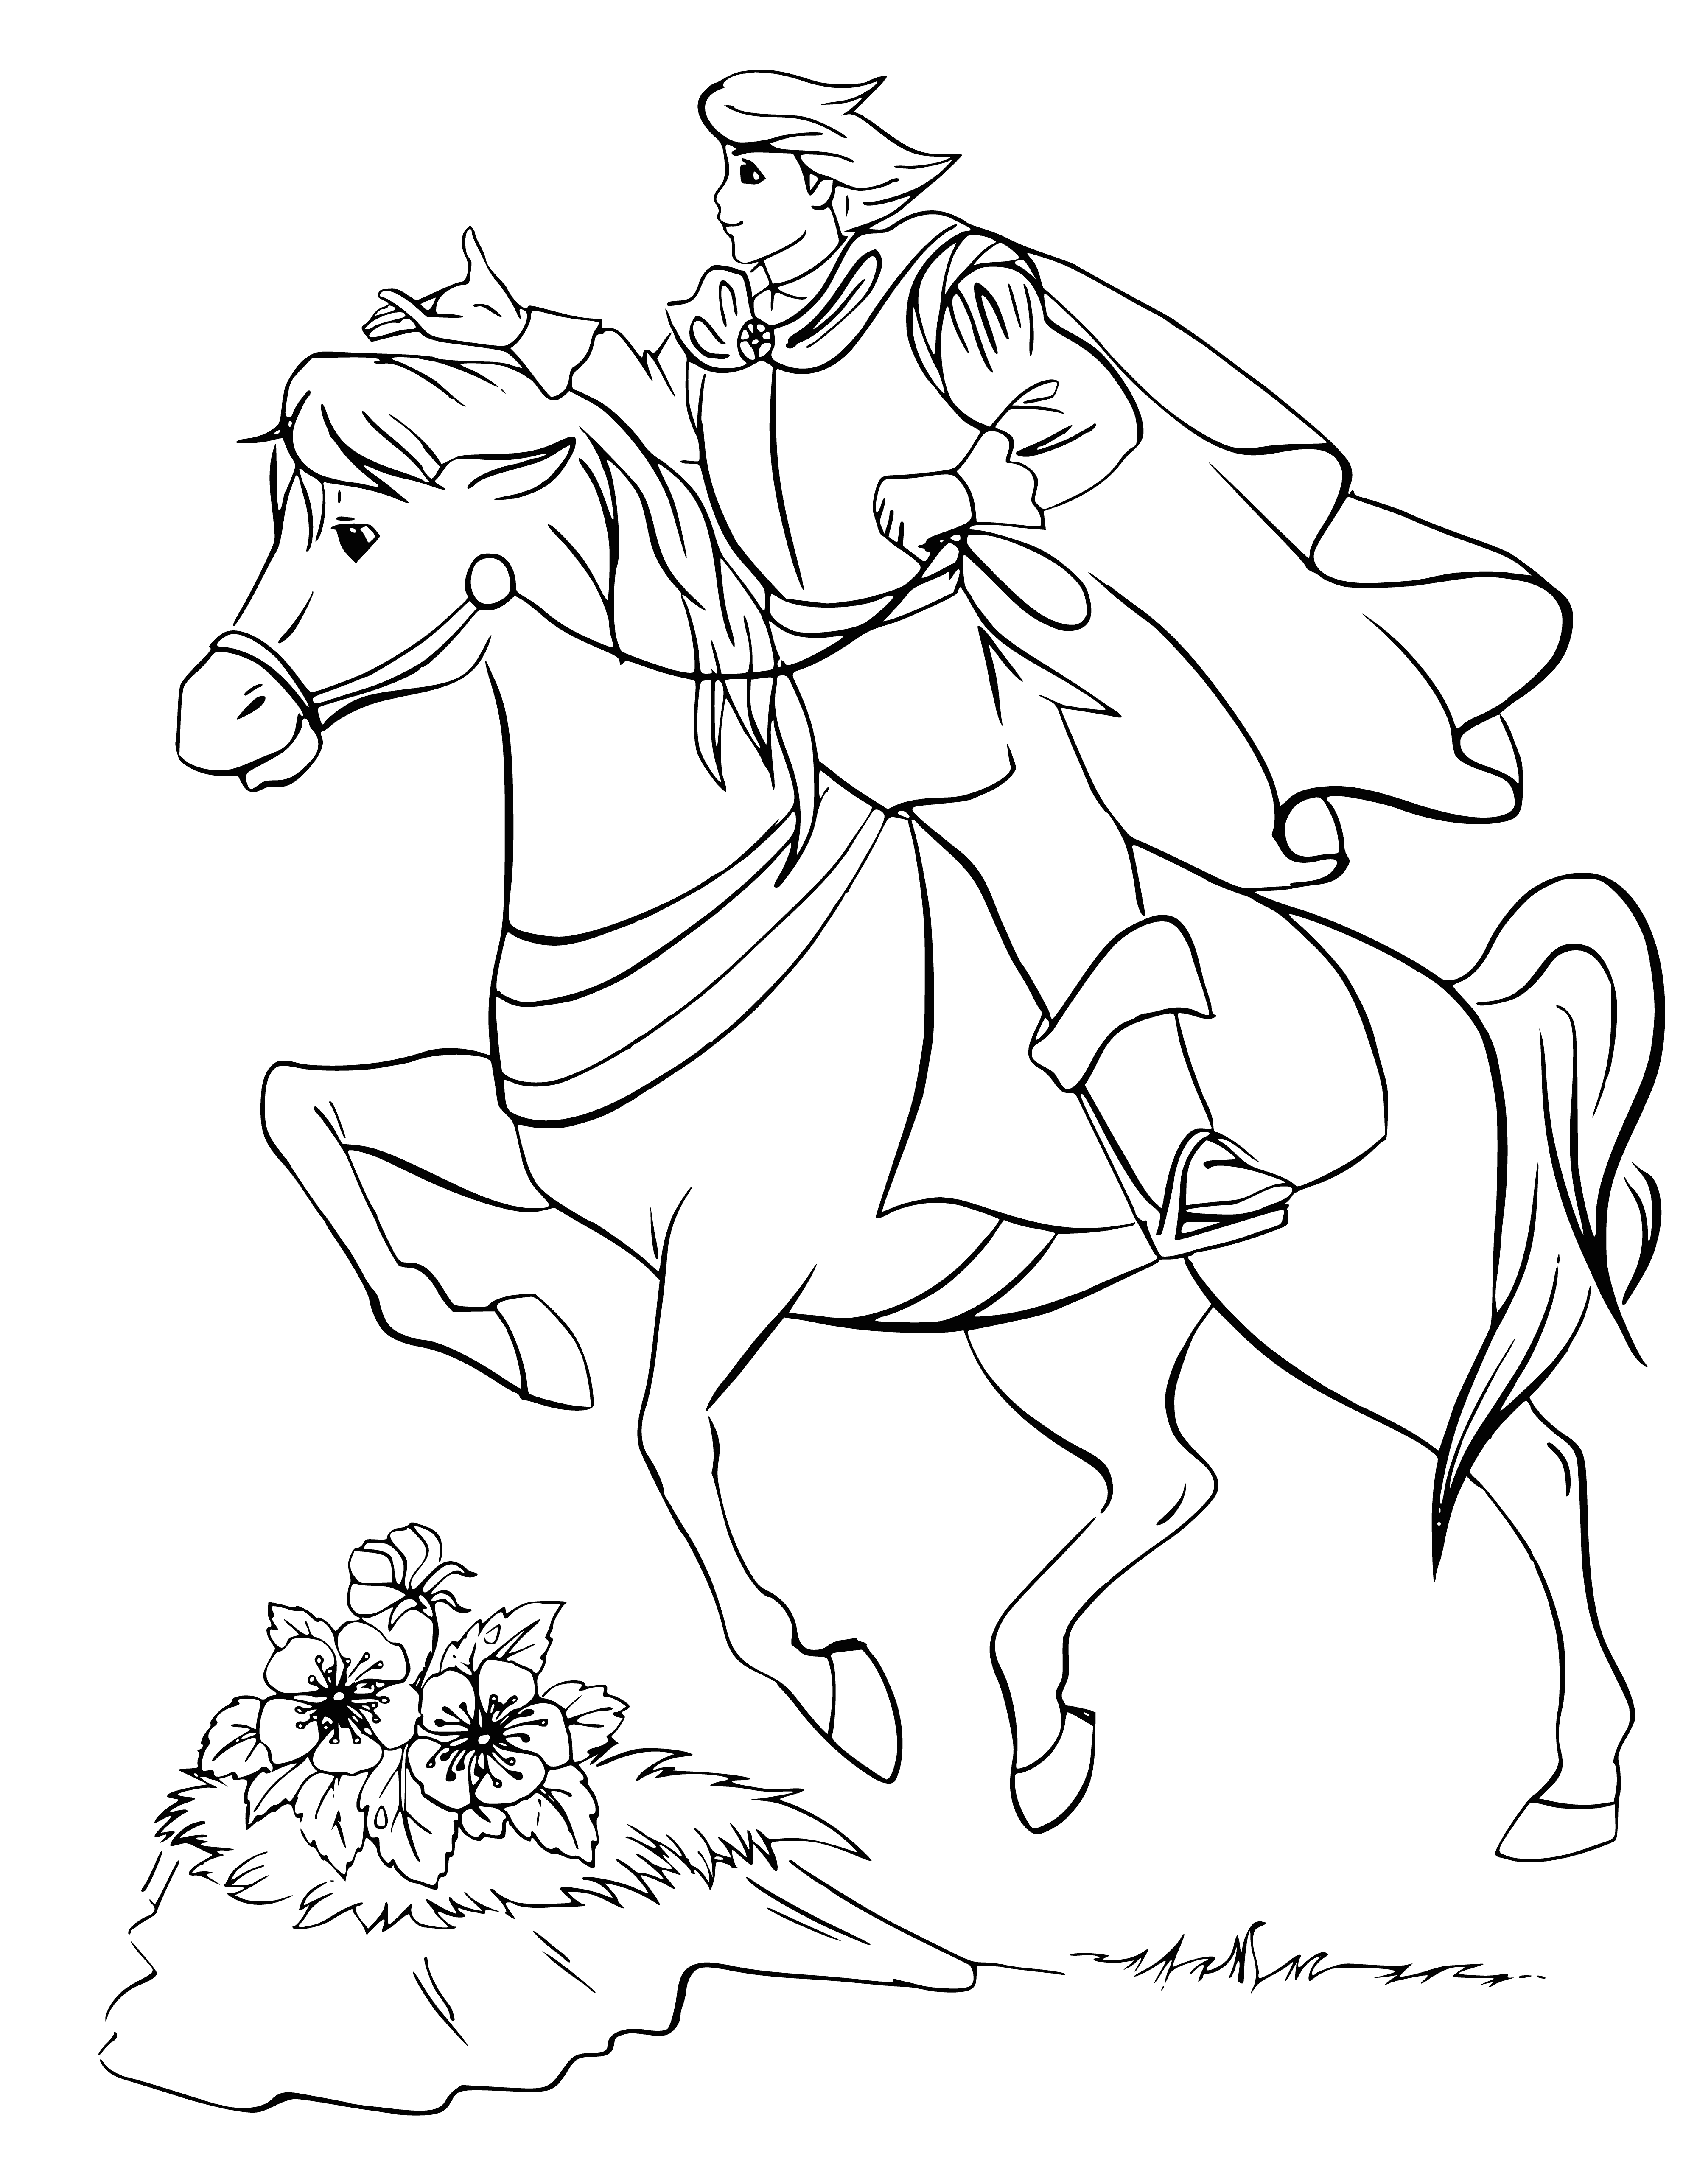 Prince of Horses coloring page